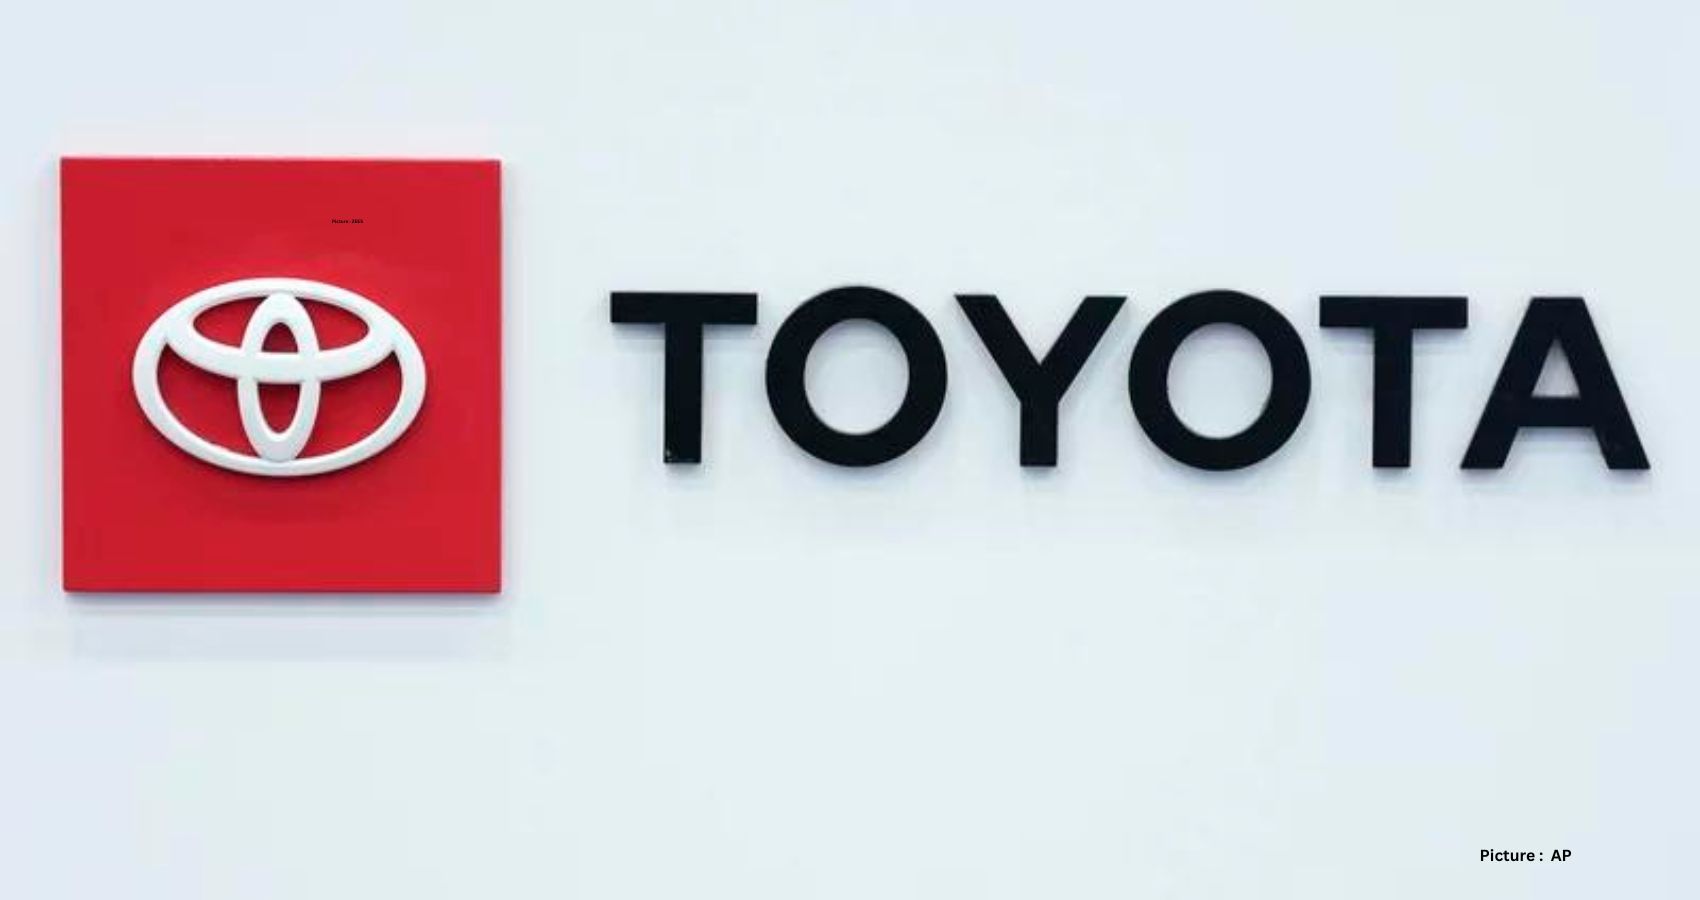 Toyota Announces Recall of 1 Million Vehicles Over Airbag Defect, Urges Swift Action for Customer Safety